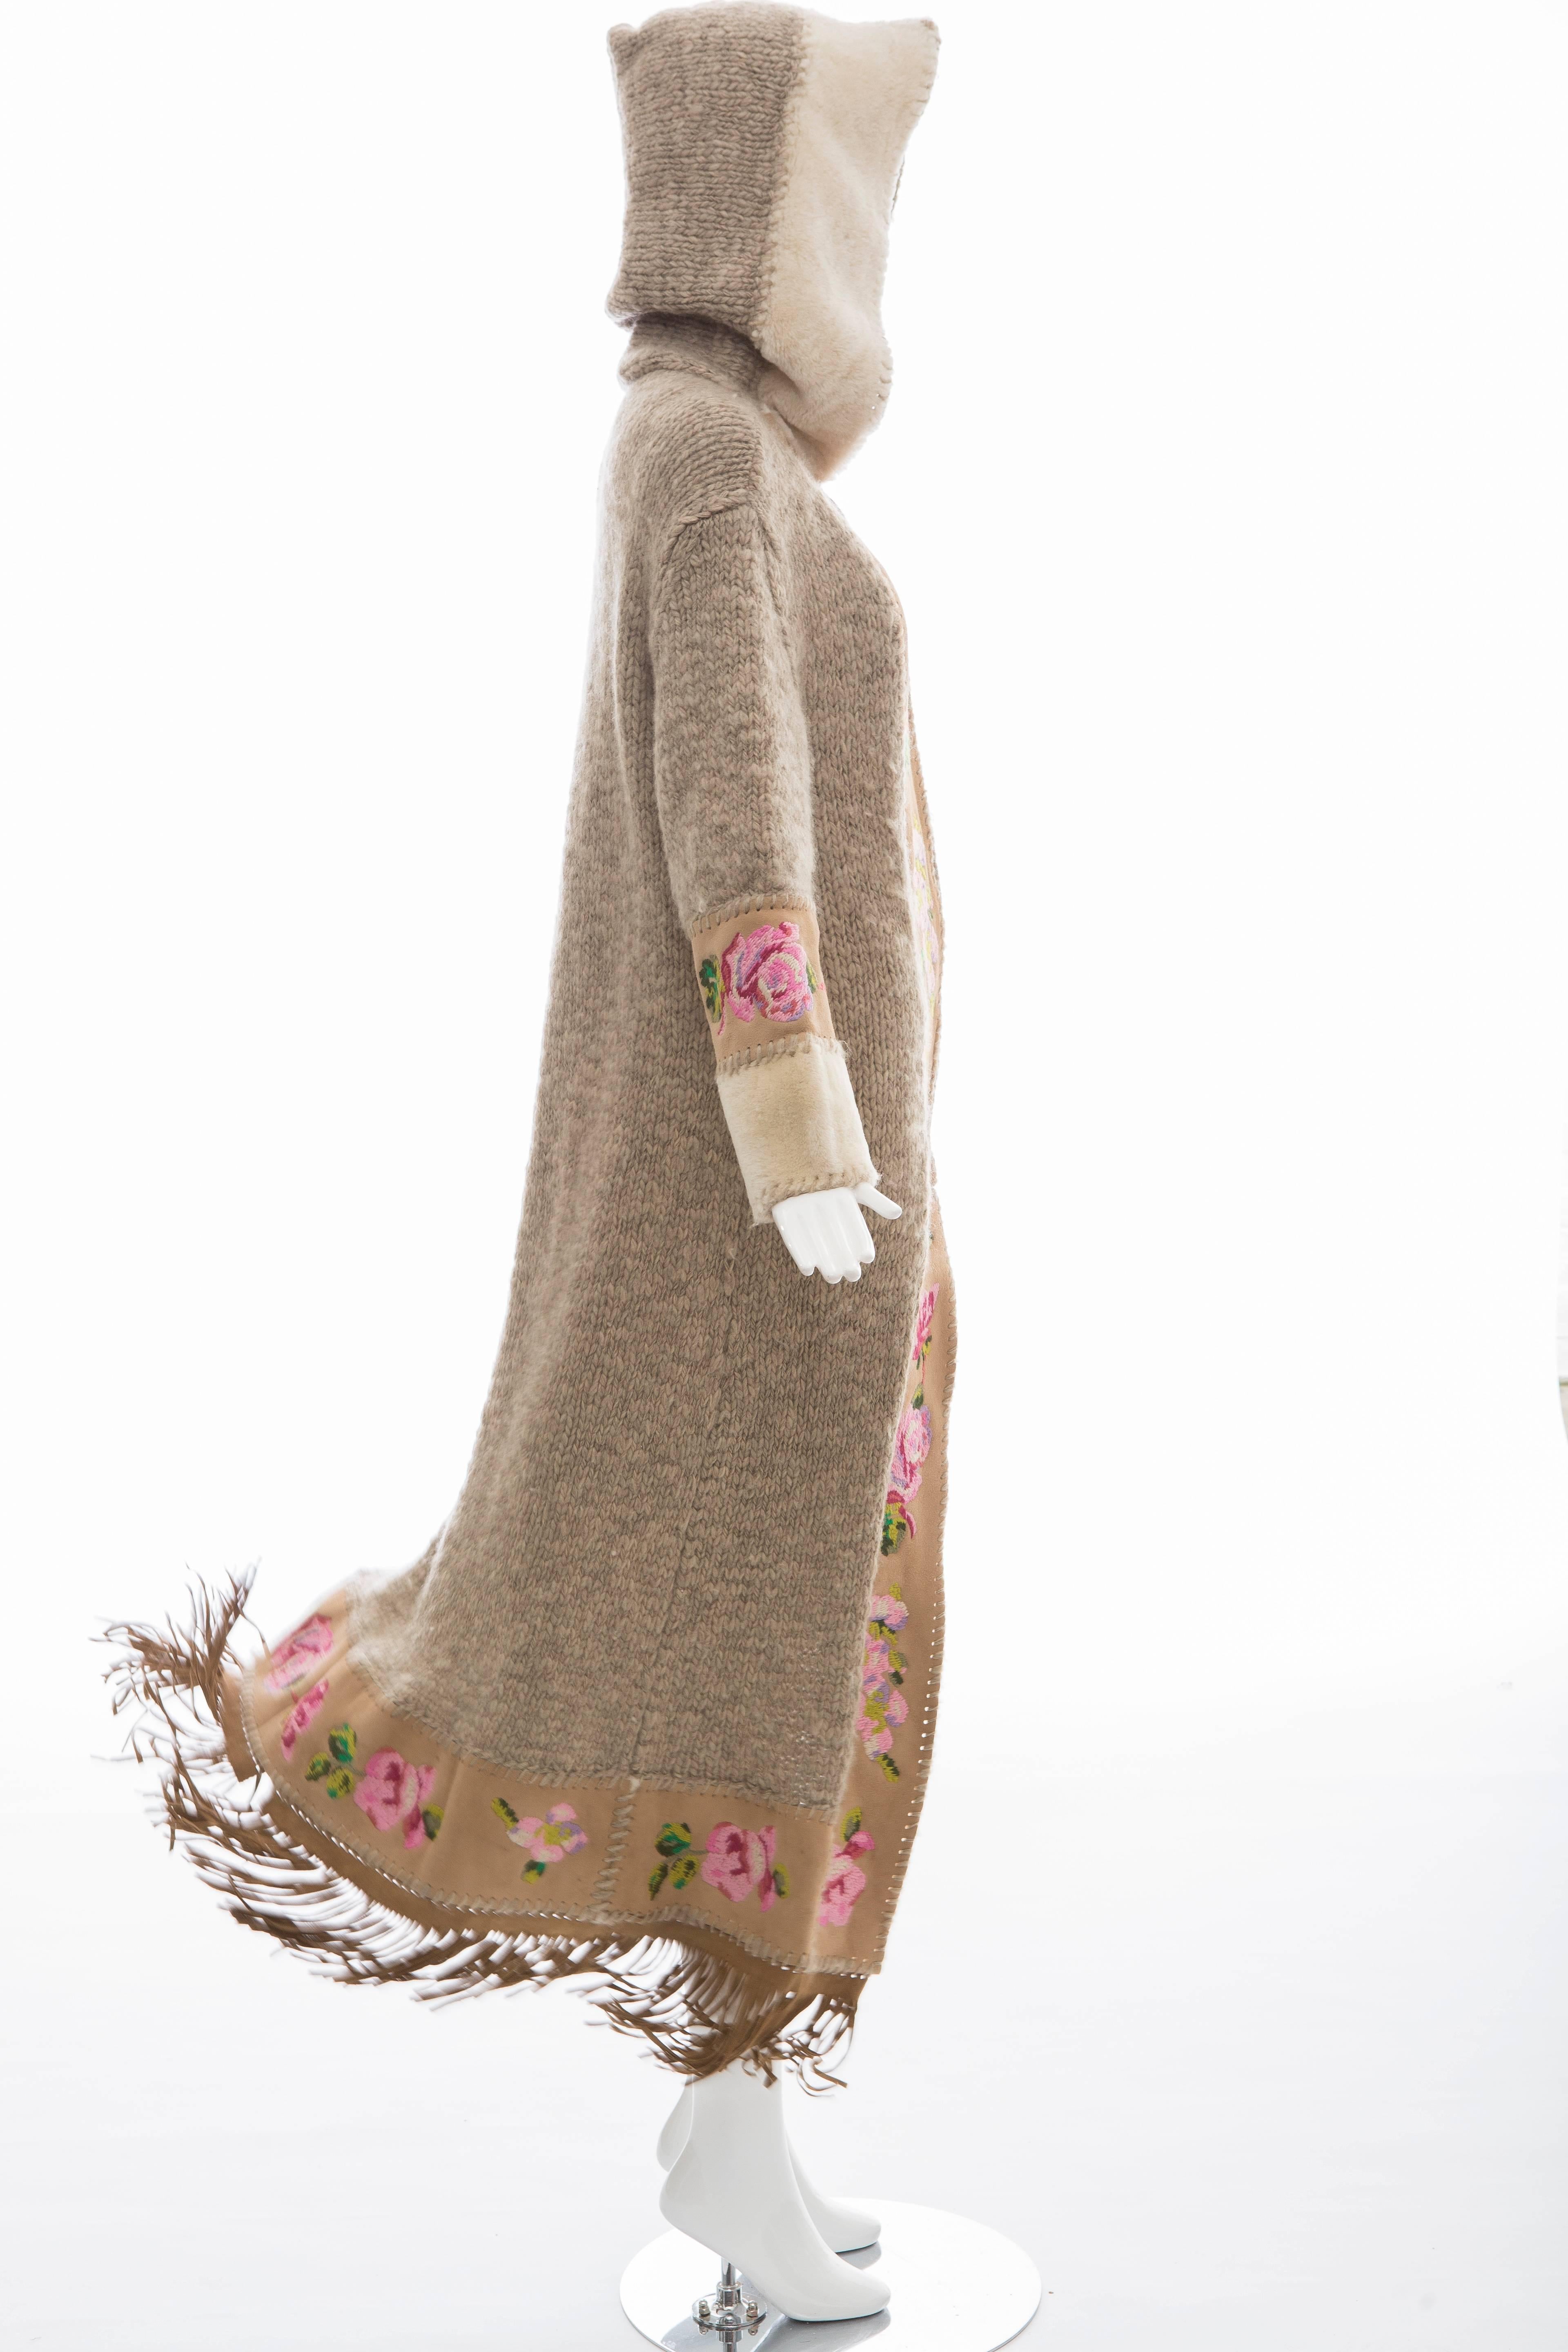 Brown John Galliano For Christian Dior Shearling Duster With Embroidered Suede Trim